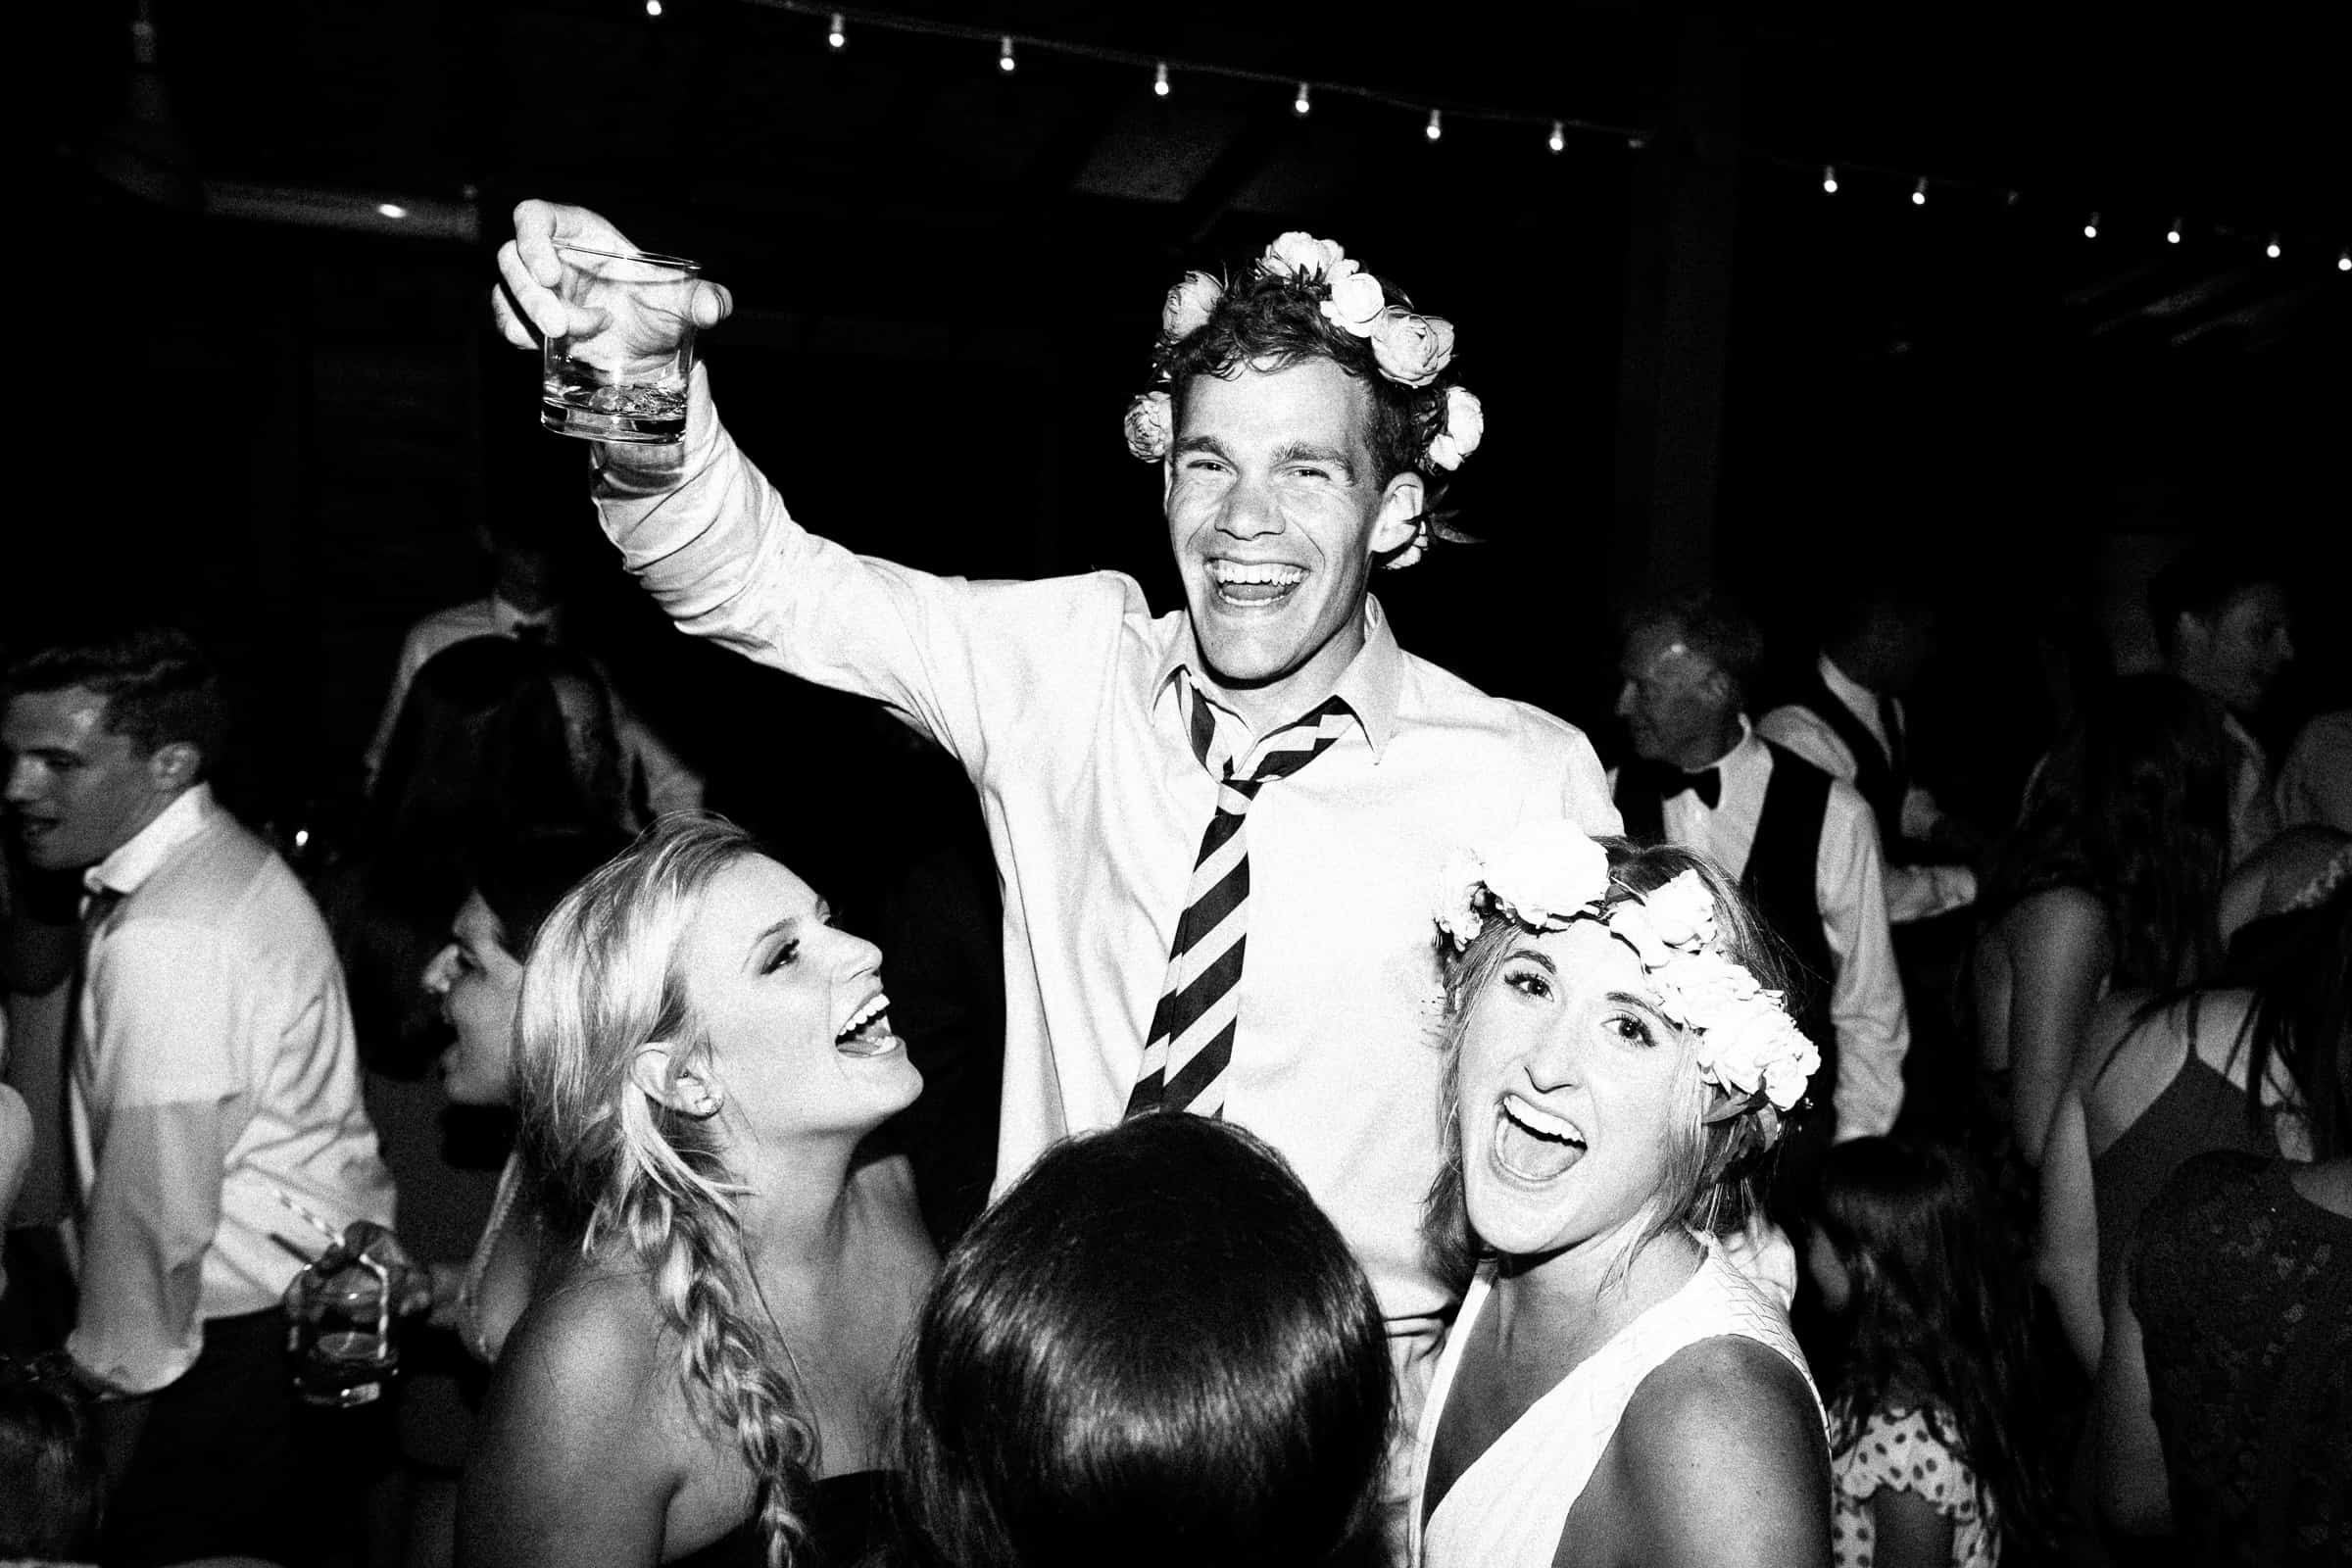 dancing with flower crowns and drinks